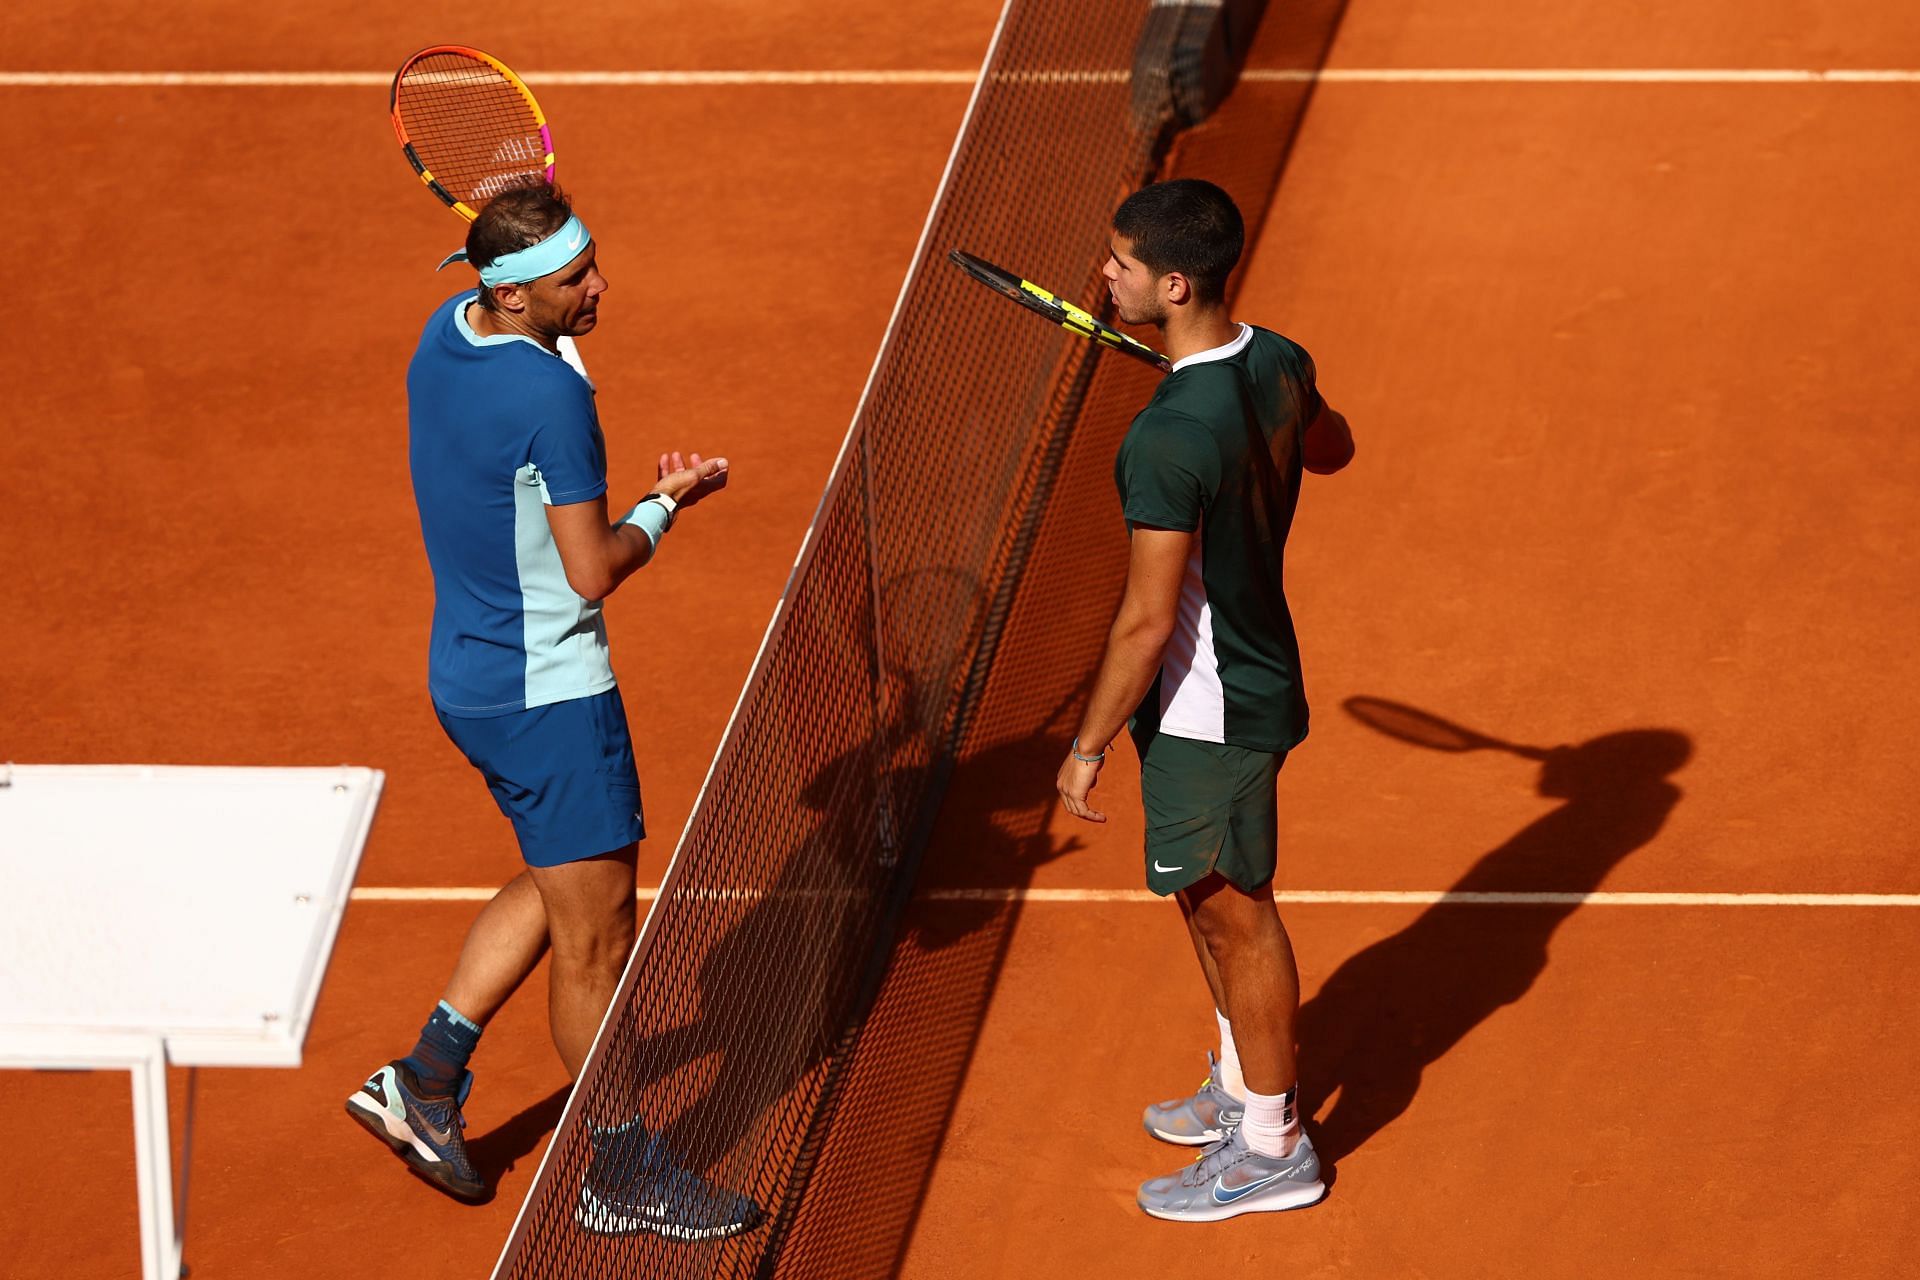 Rafael Nadal and Carlos Alcaraz during their match at the 2022 Madrid Open